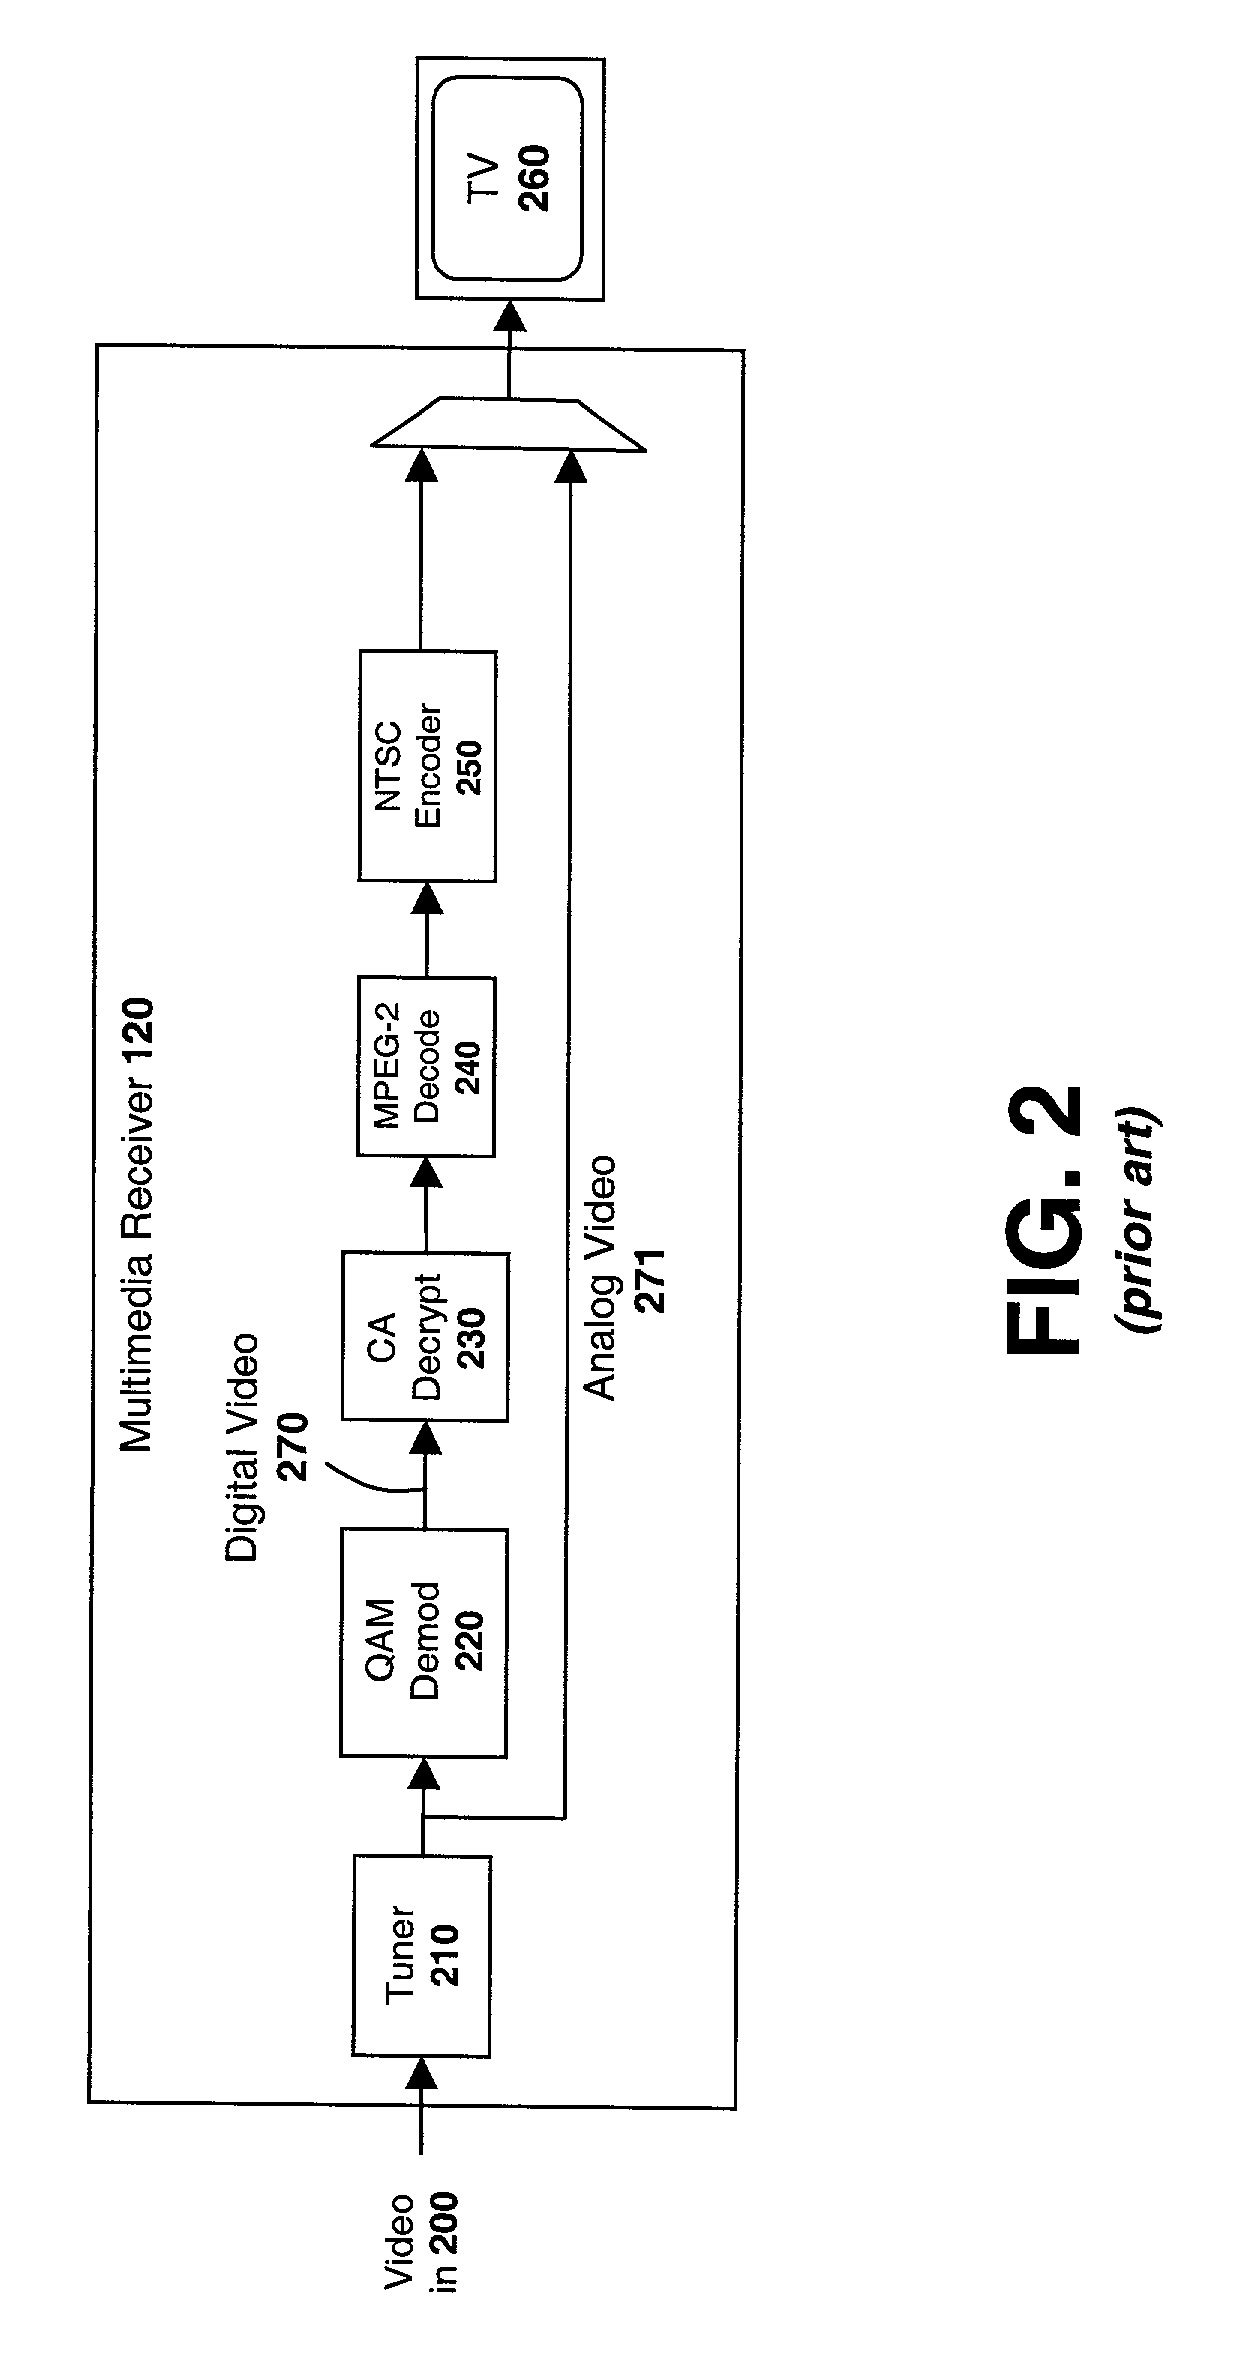 System and method for improved multi-stream multimedia transmission and processing